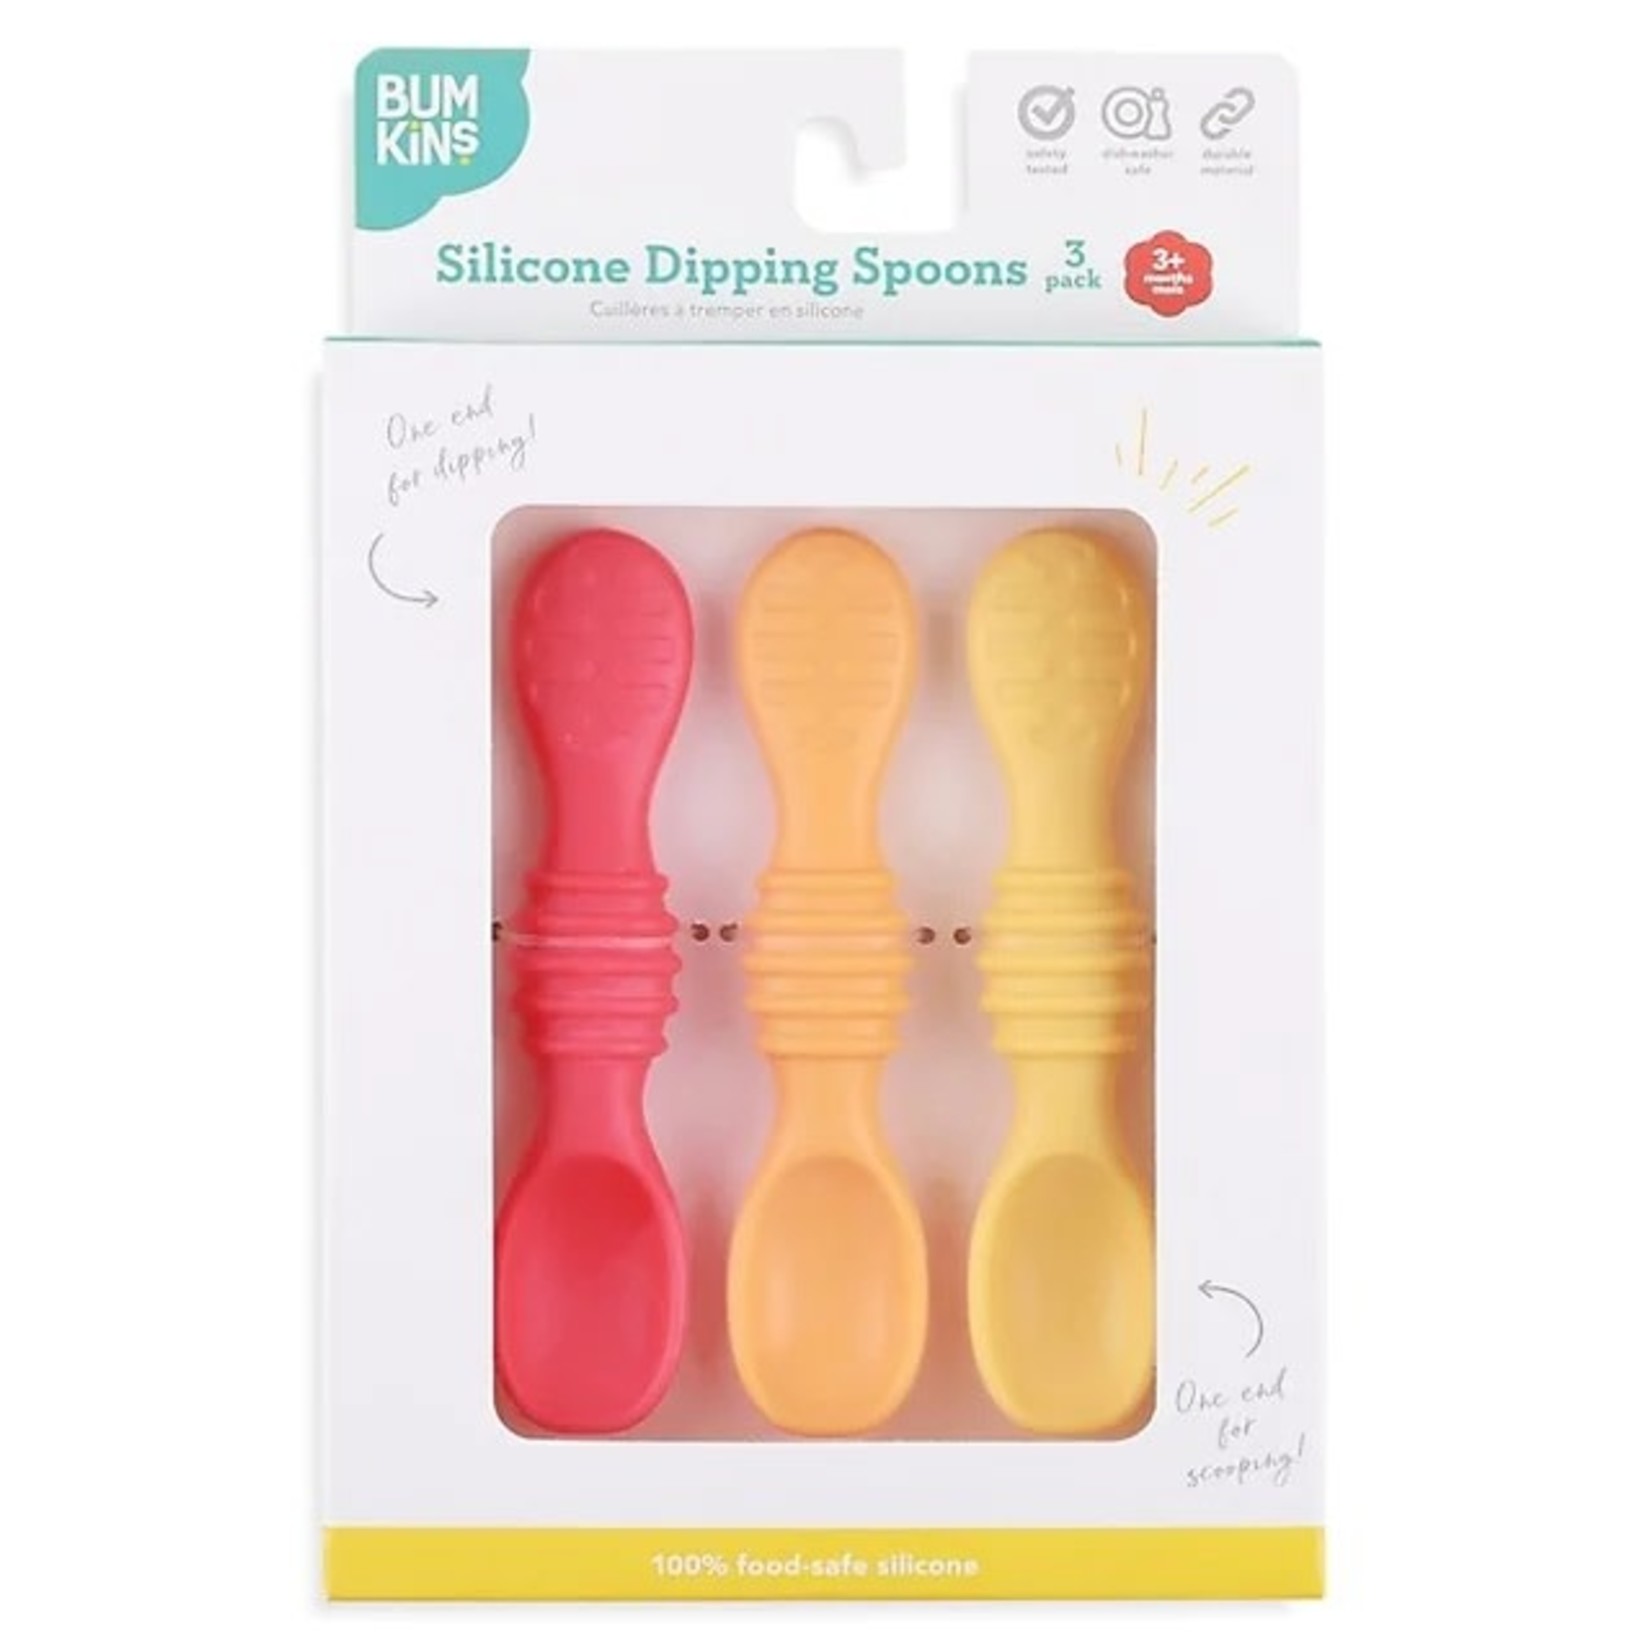 Bumkins BUMKINS - 3-piece Silicone Dipping Spoons - Red/Orange/Yellow